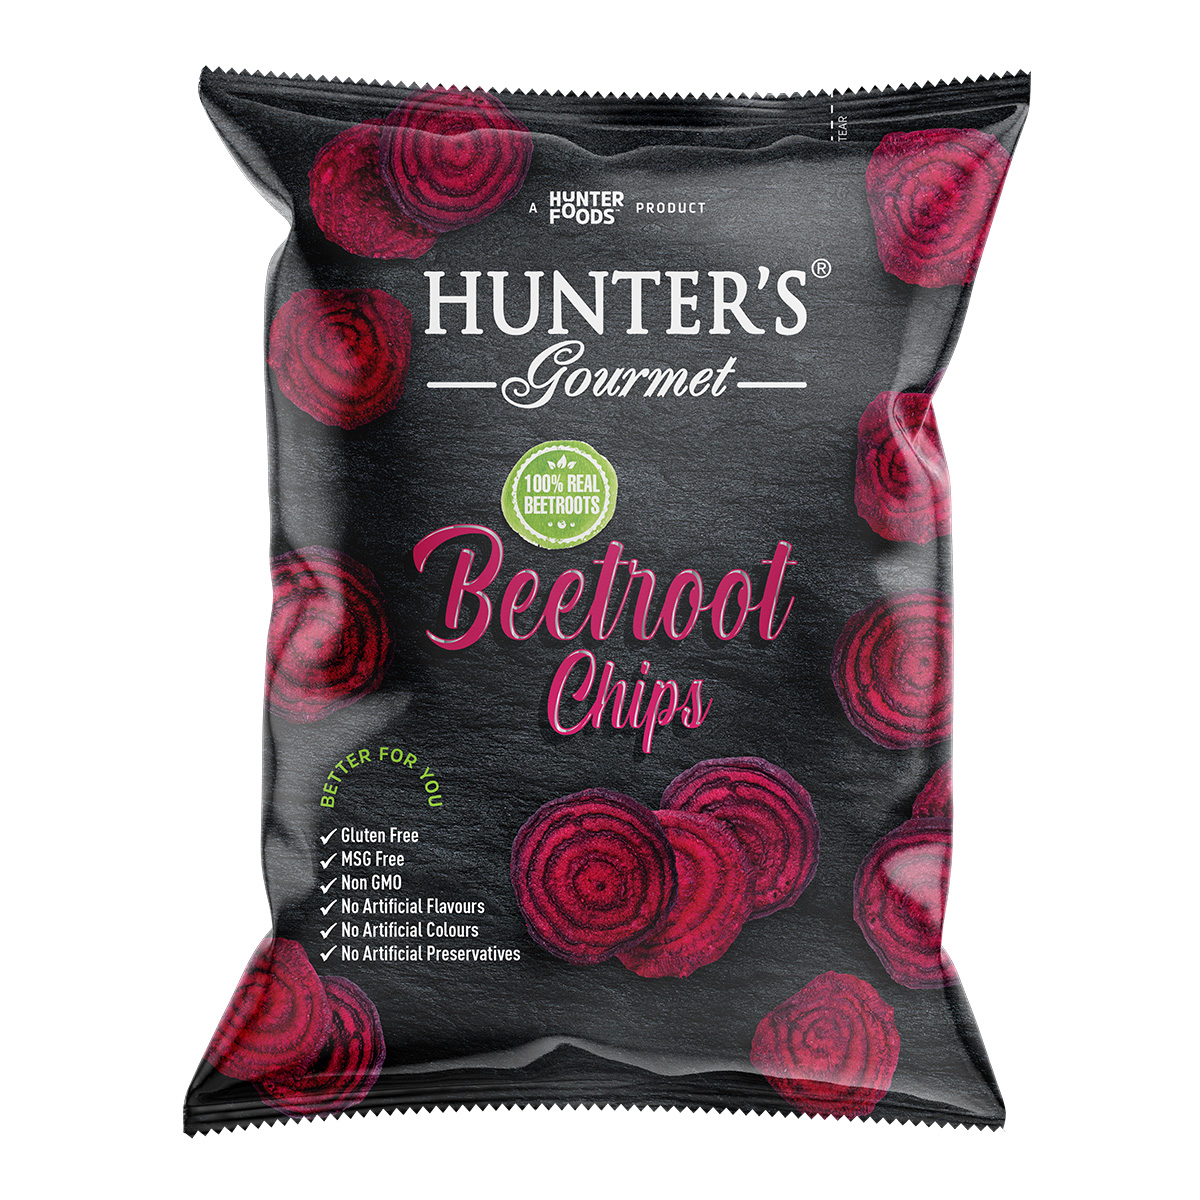 Hunter’s Gourmet Snap Pea Chips (50gm)